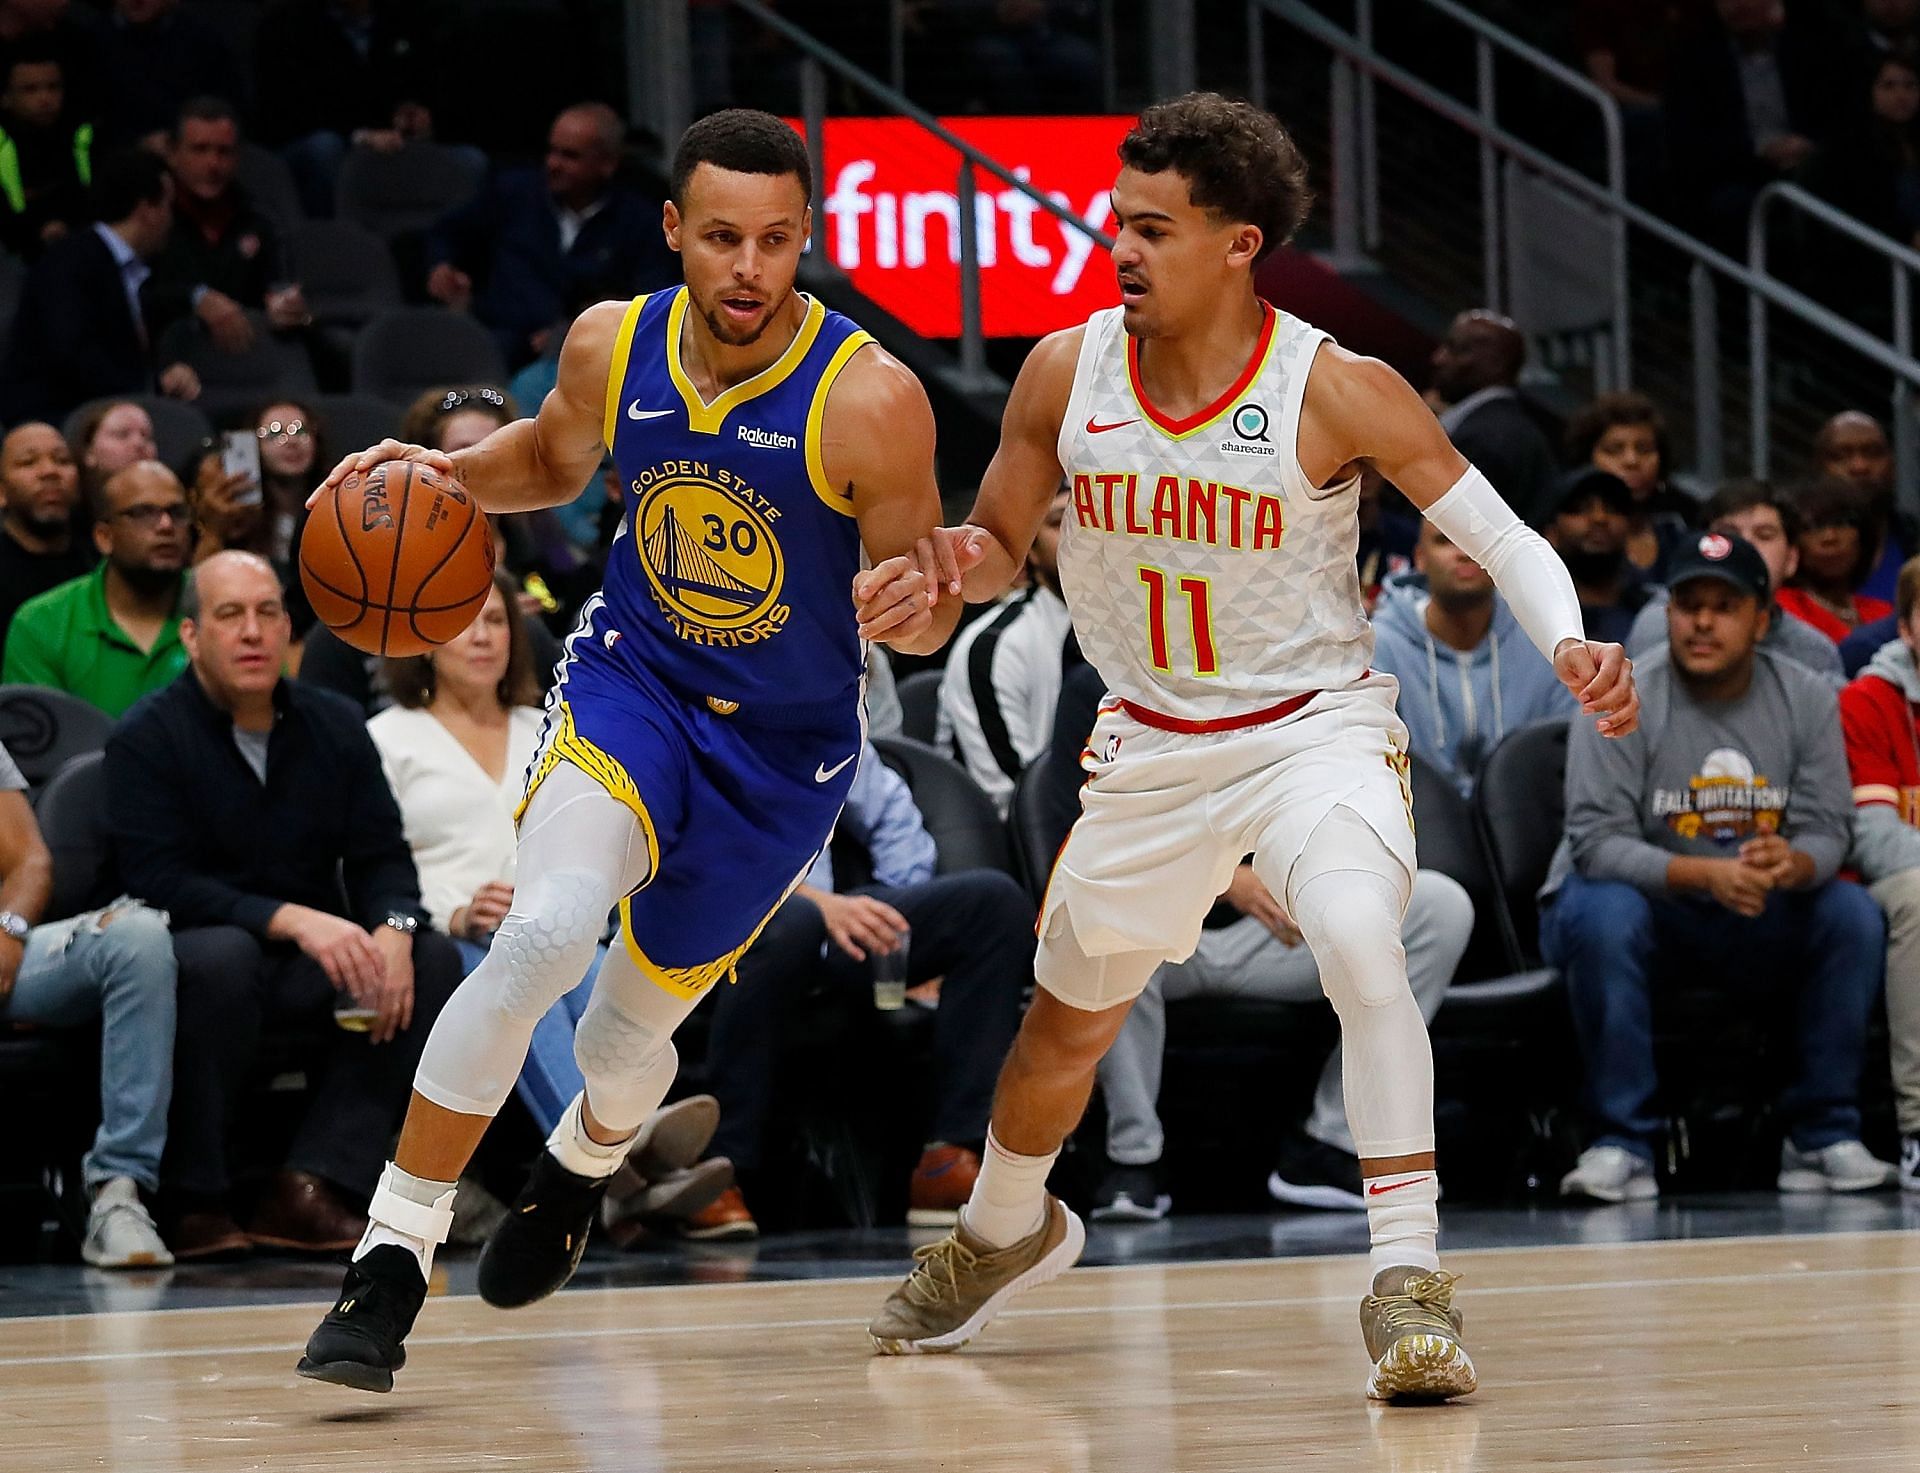 Steph Curry of the Golden State Warriors against Trae Young of the Atlanta Hawks in 2018